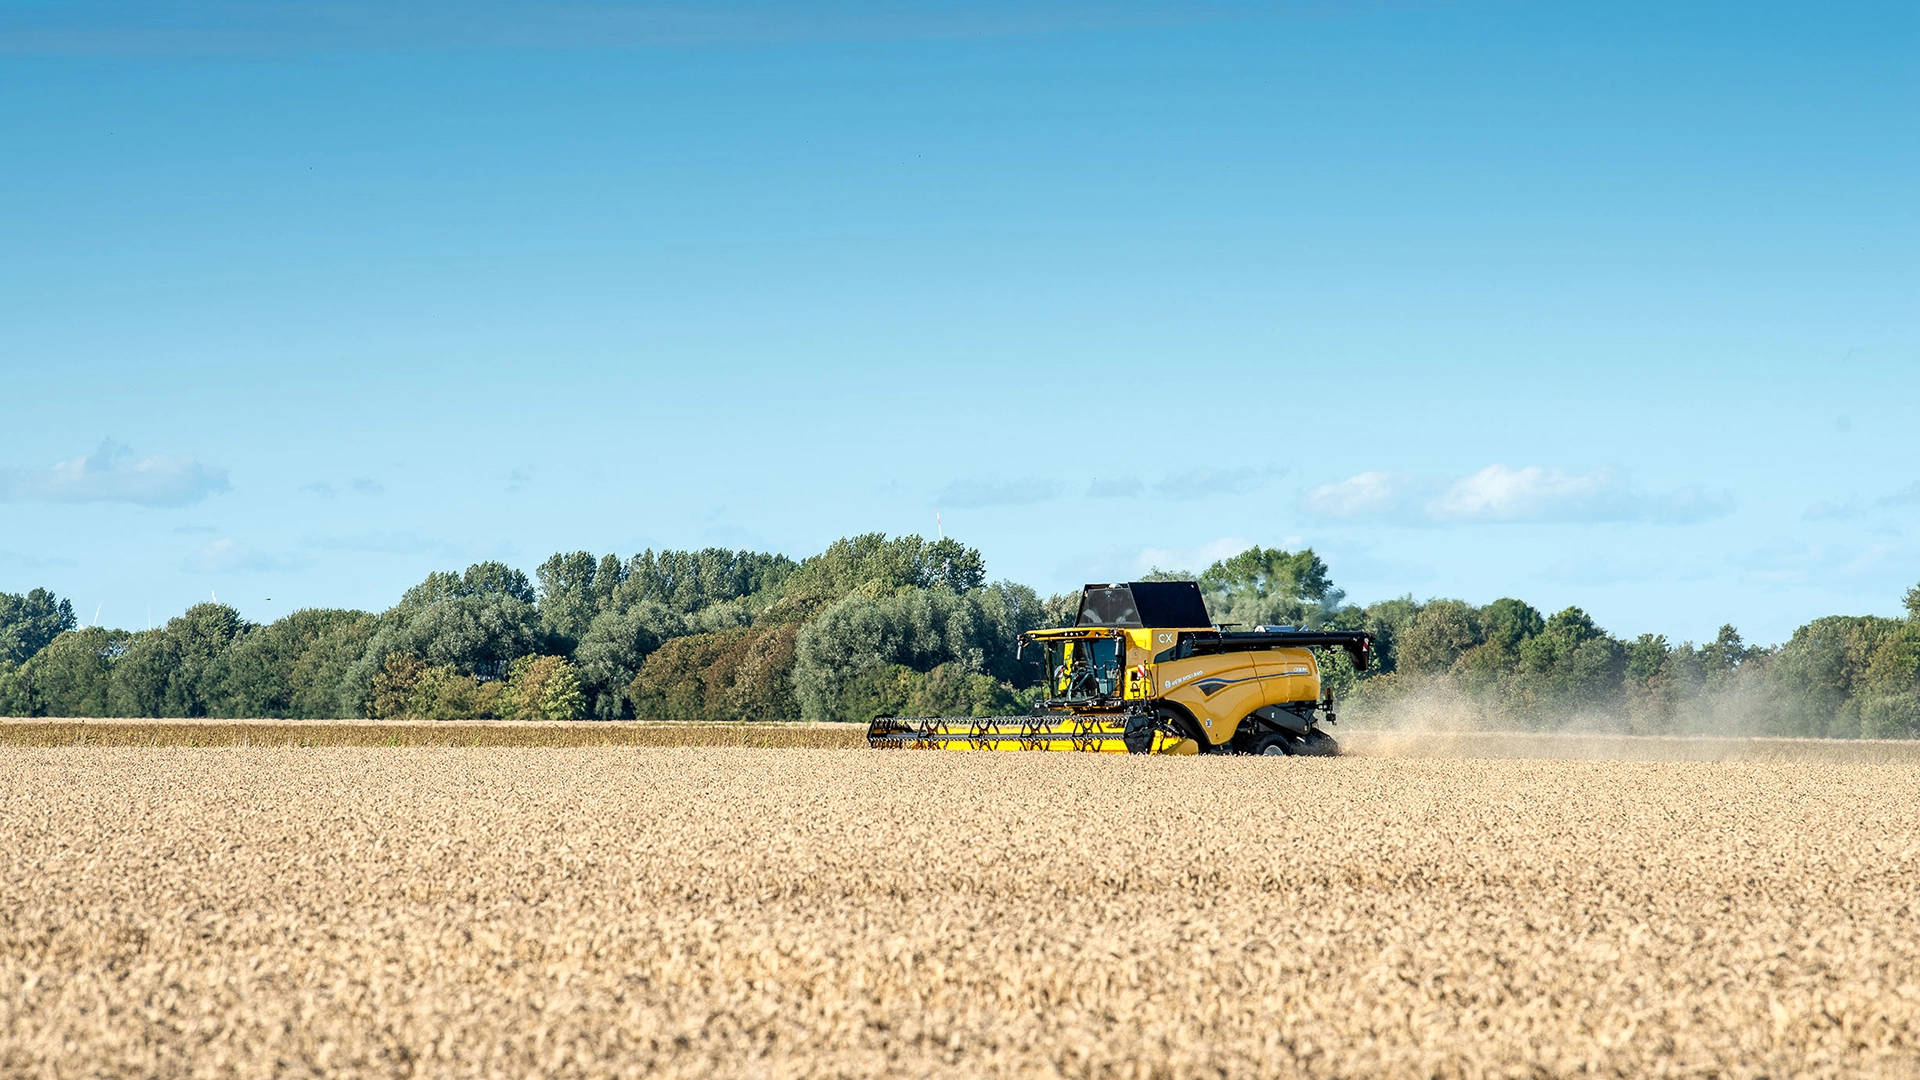 New Holland CX7 & CX8 combine harvester models side by side in a golden field with a picturesque countryside backdrop featuring wind turbines and clear skies.